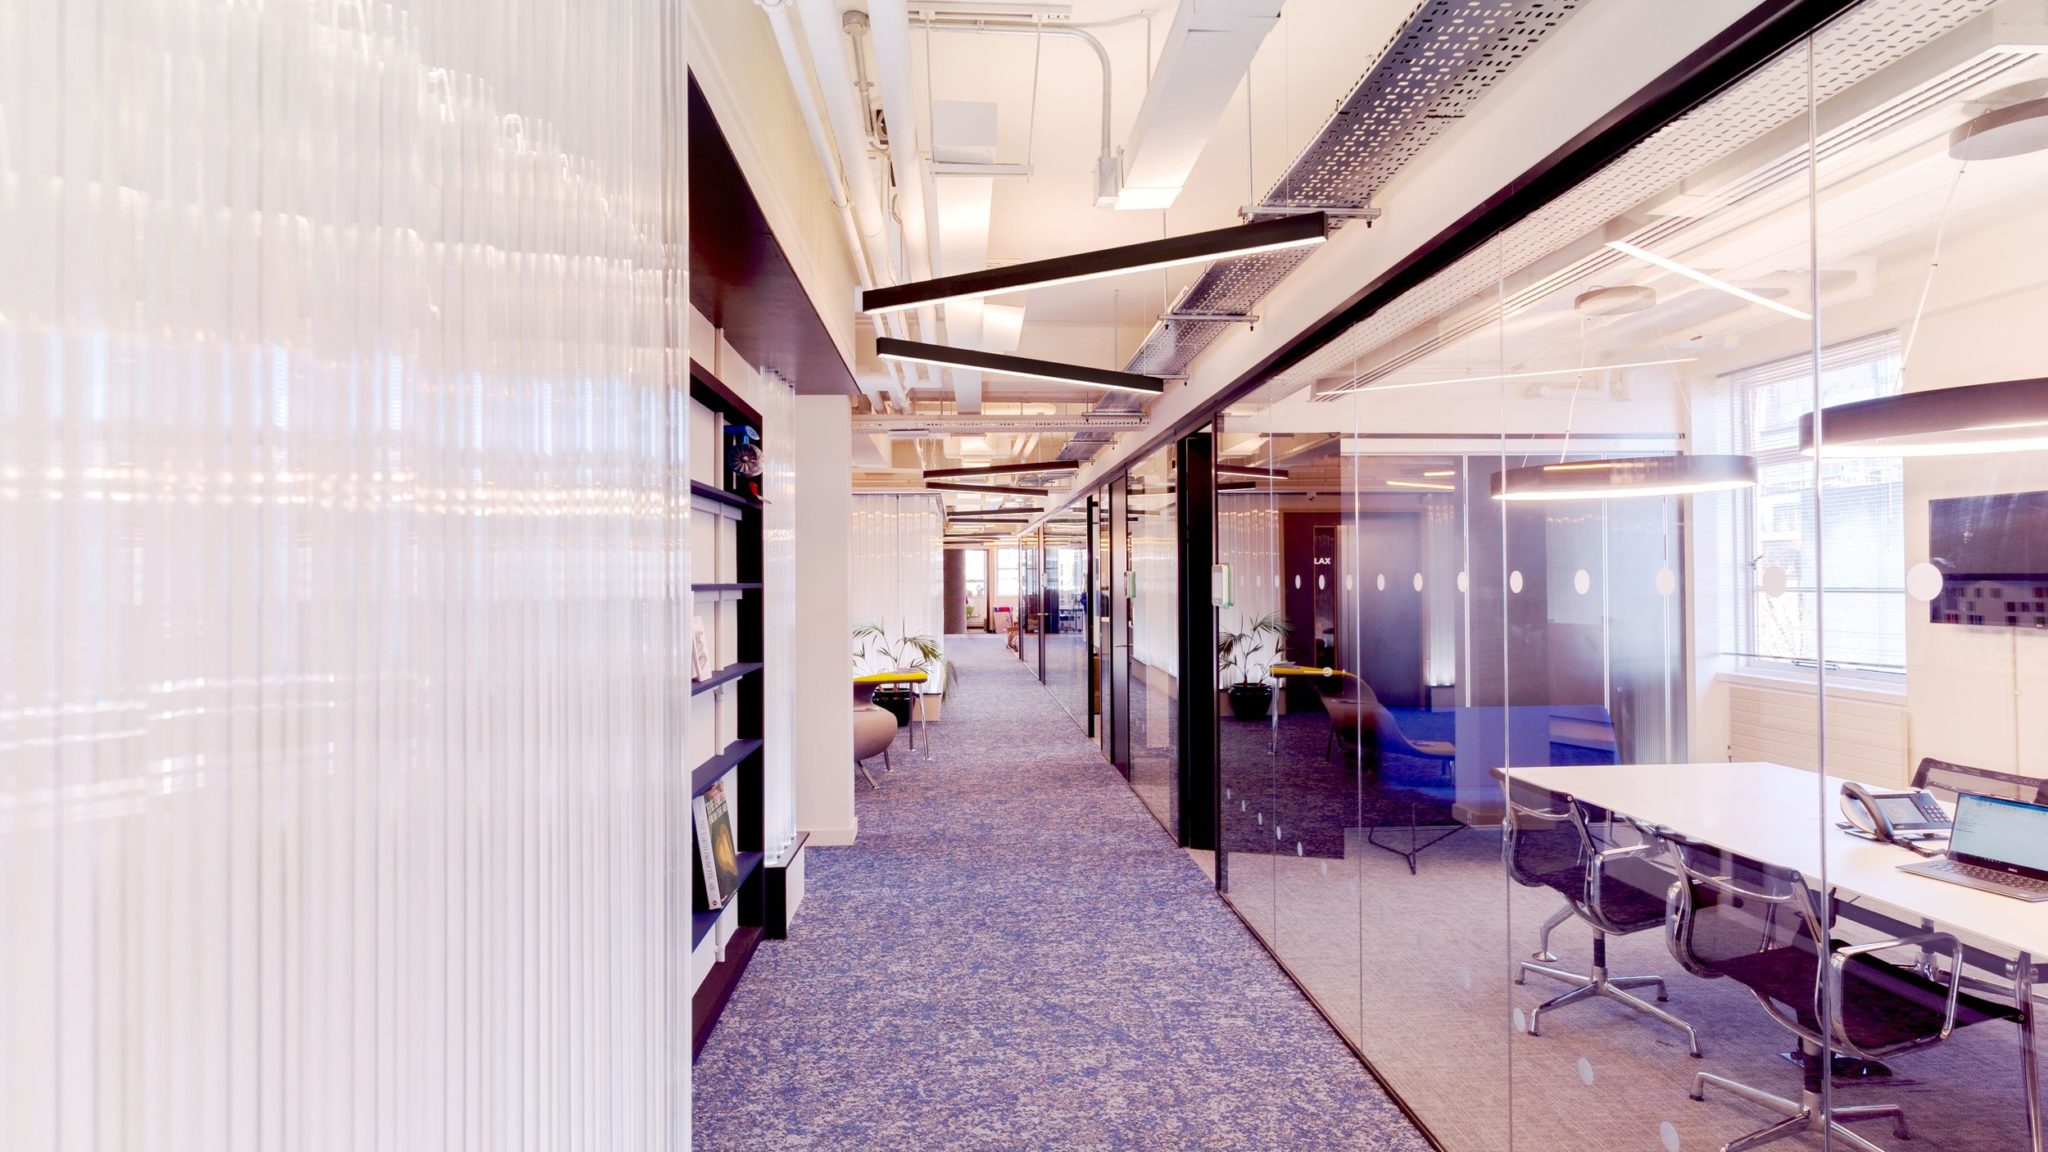 Tenant focused office fitout at 78 Whitfield Street, London.